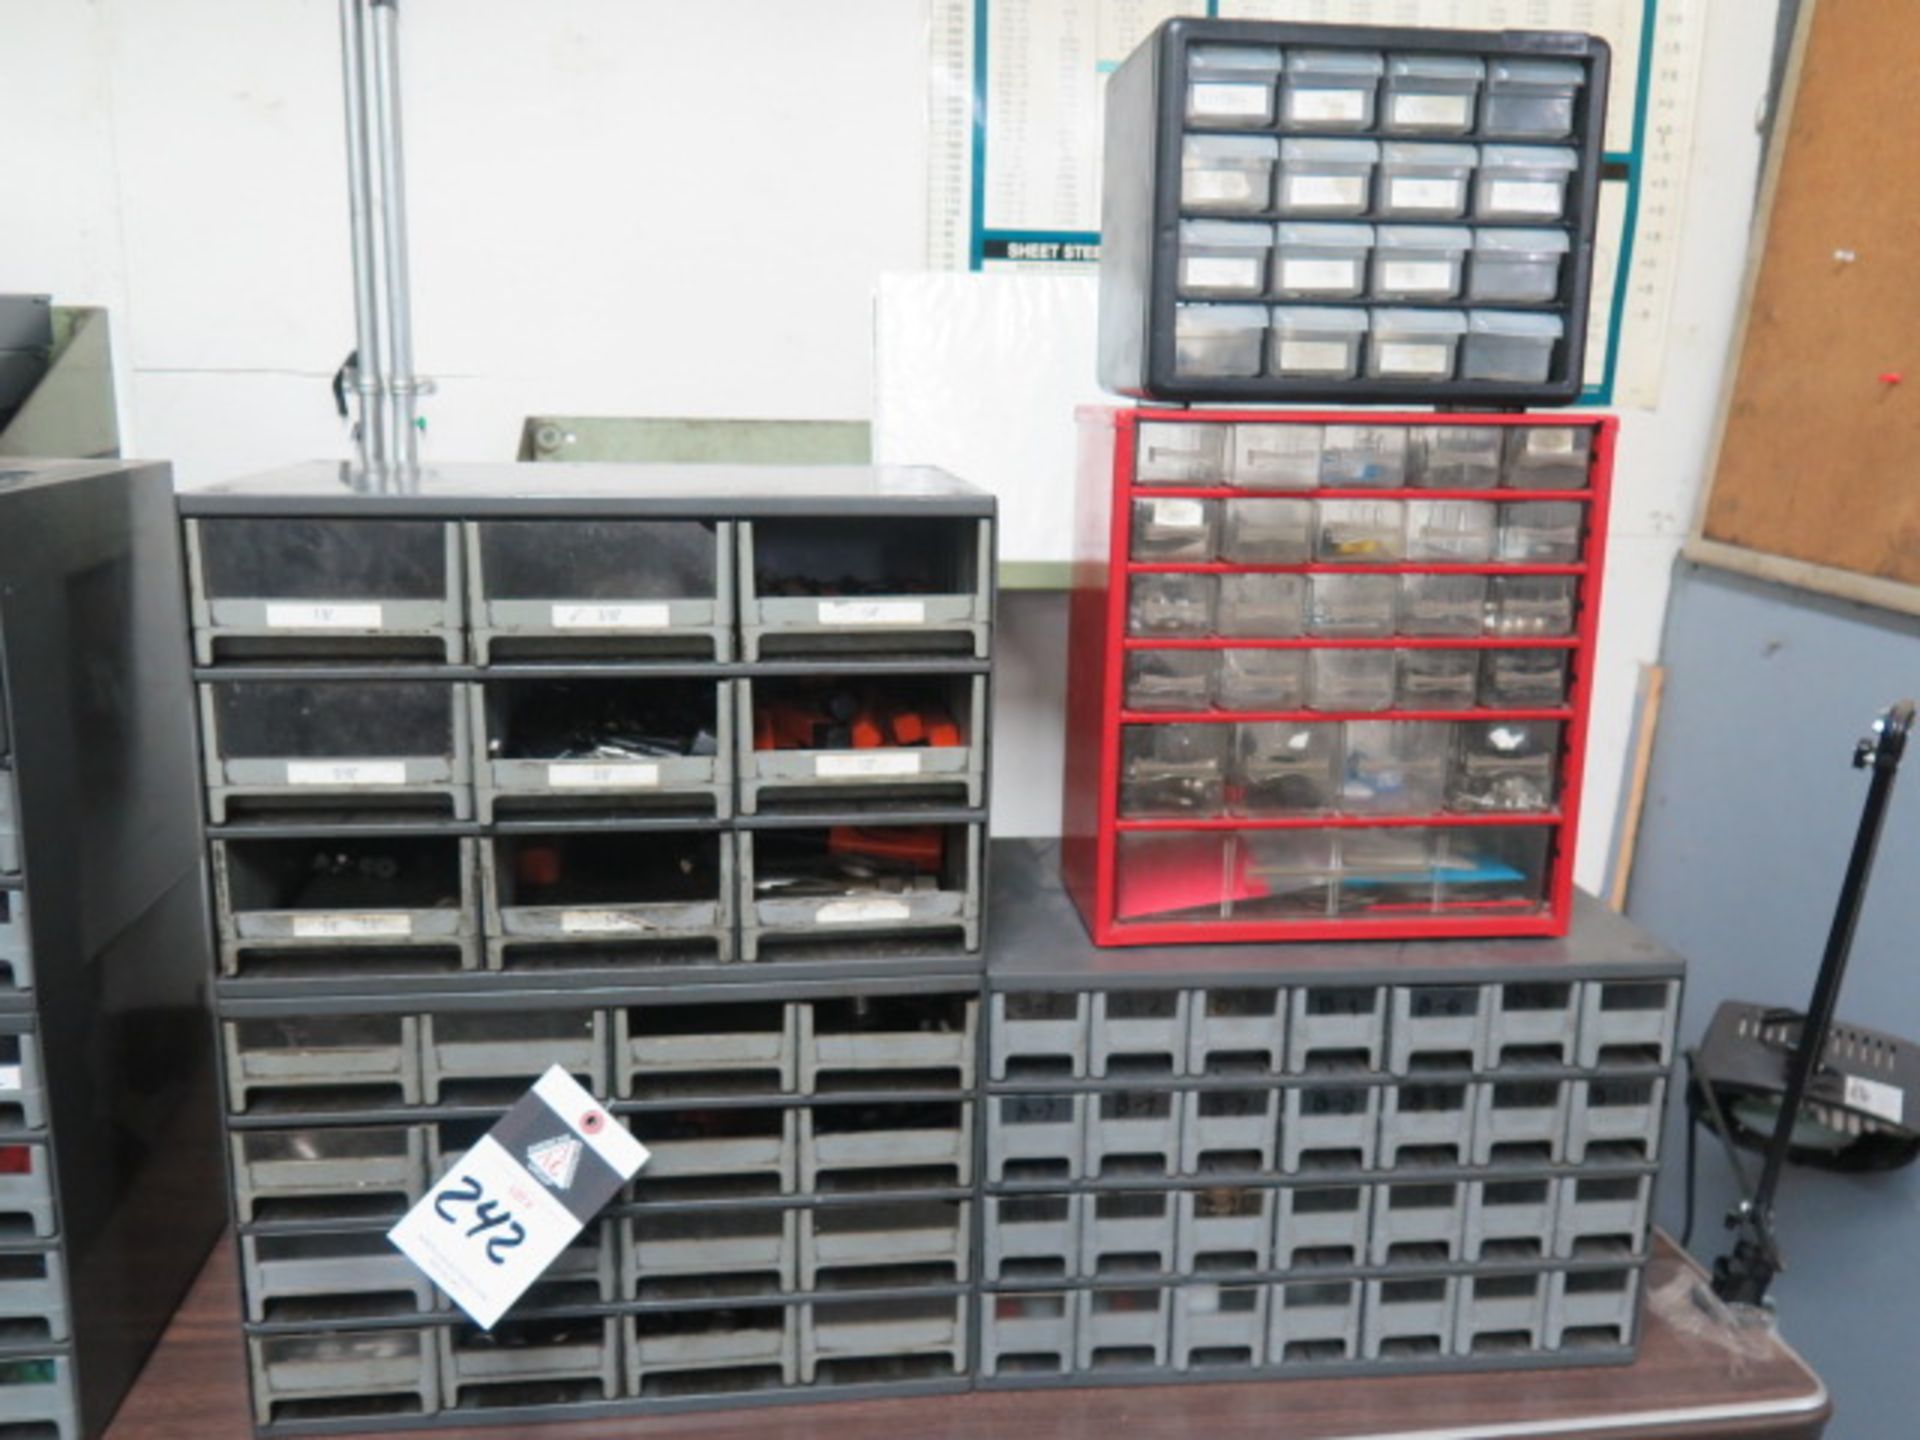 Carbide and High Speed Endmills, Carbide Inserts, Mill Slot Cutters and Hardware w/ Cabinets (SOLD